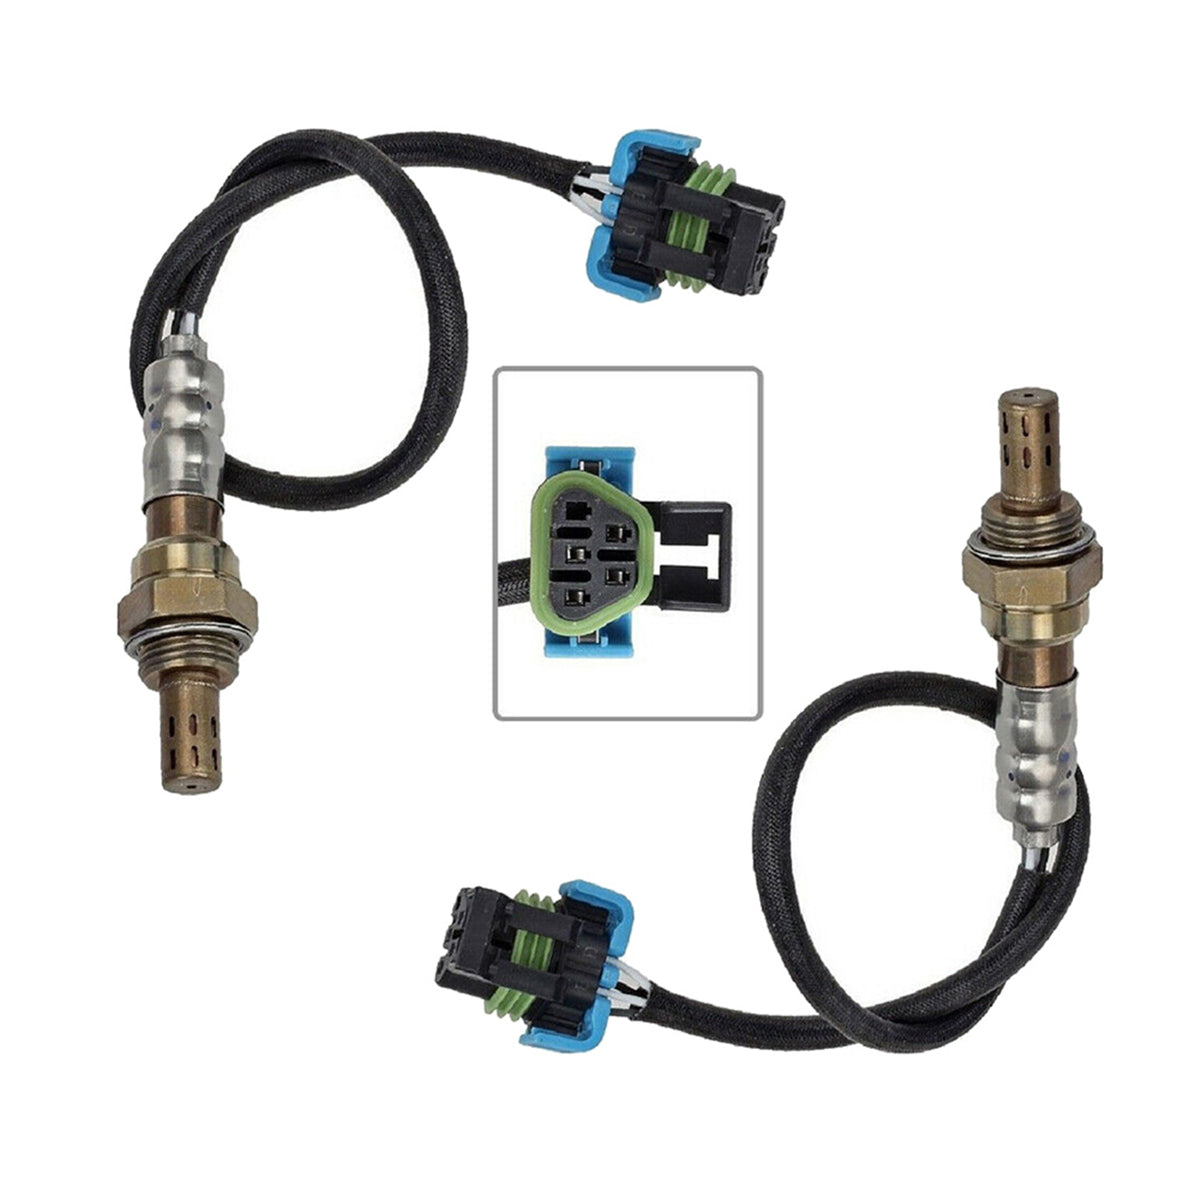 Daysyore 4pcs Up / Downstream O2 Oxygen Sensor 234-4815 234-4816 for Enclave Acadia Saturn Outlook 3.6L